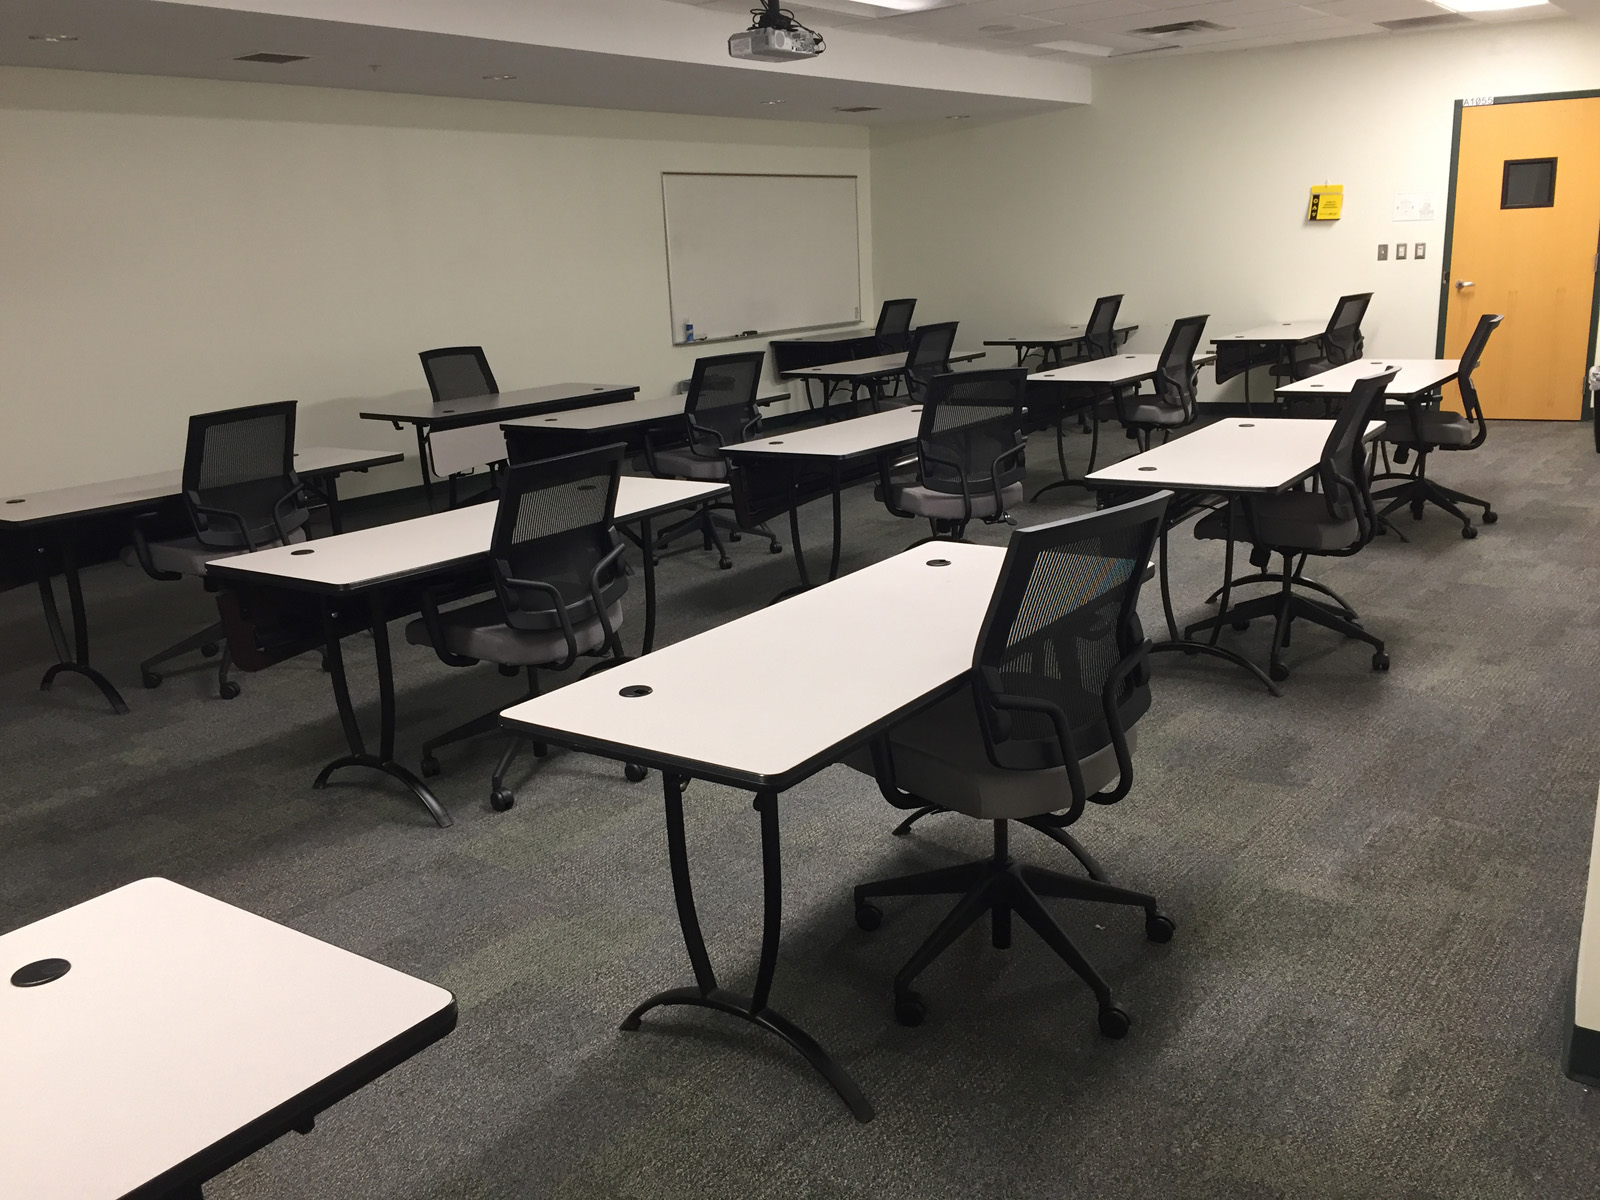 A1055 Meeting Room at the Groves